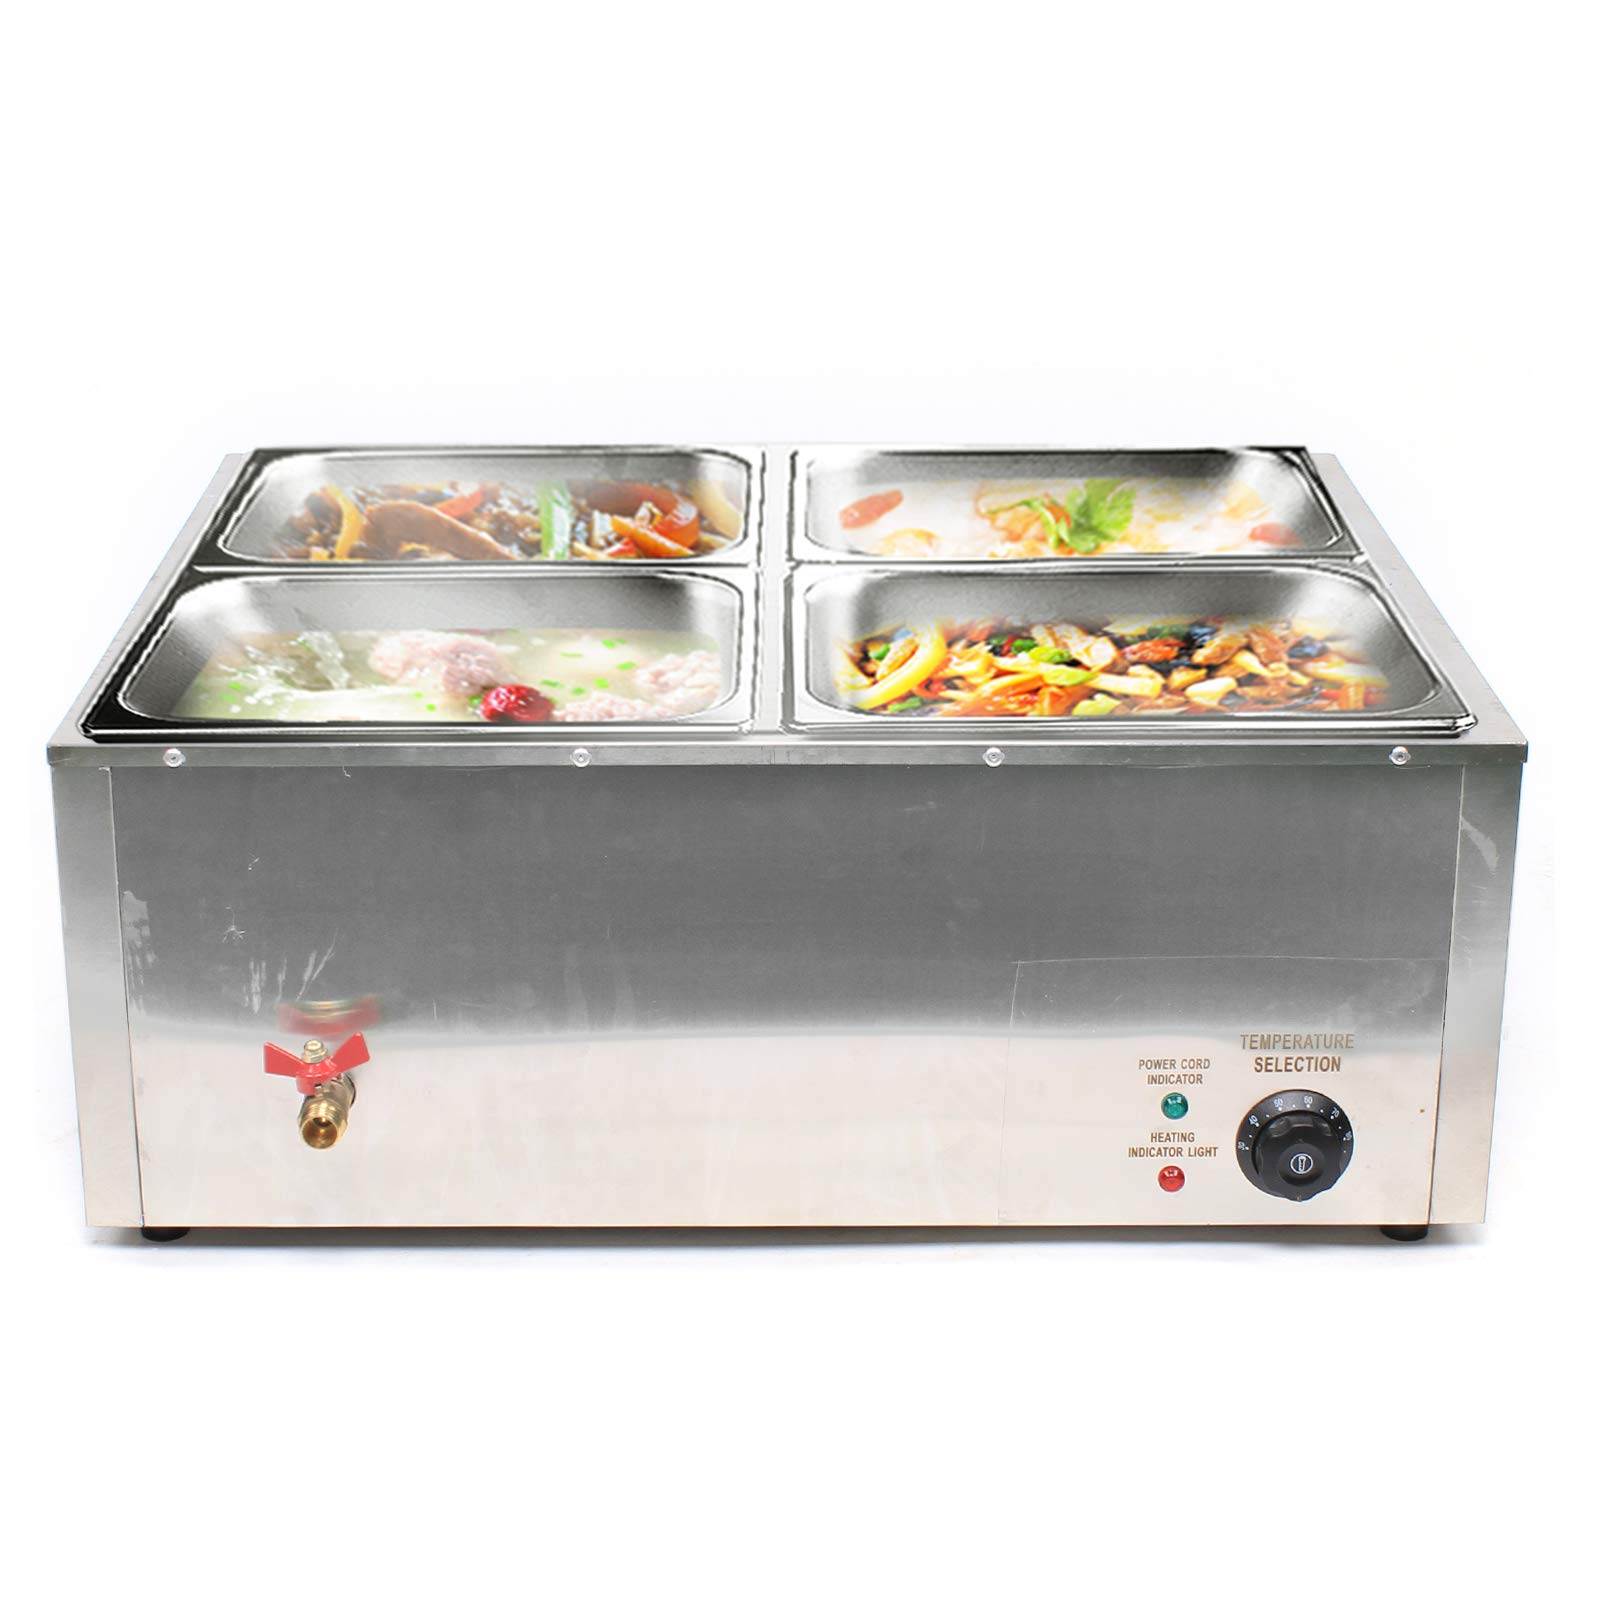 110V 4-Pan Commercial Food Warmer 6-Inch Deep Food Grade Stainless Steel Commercial Food Steam Table Electric Countertop Food Warmer Restaurant Warming Buffet Server for Catering and Restaurants